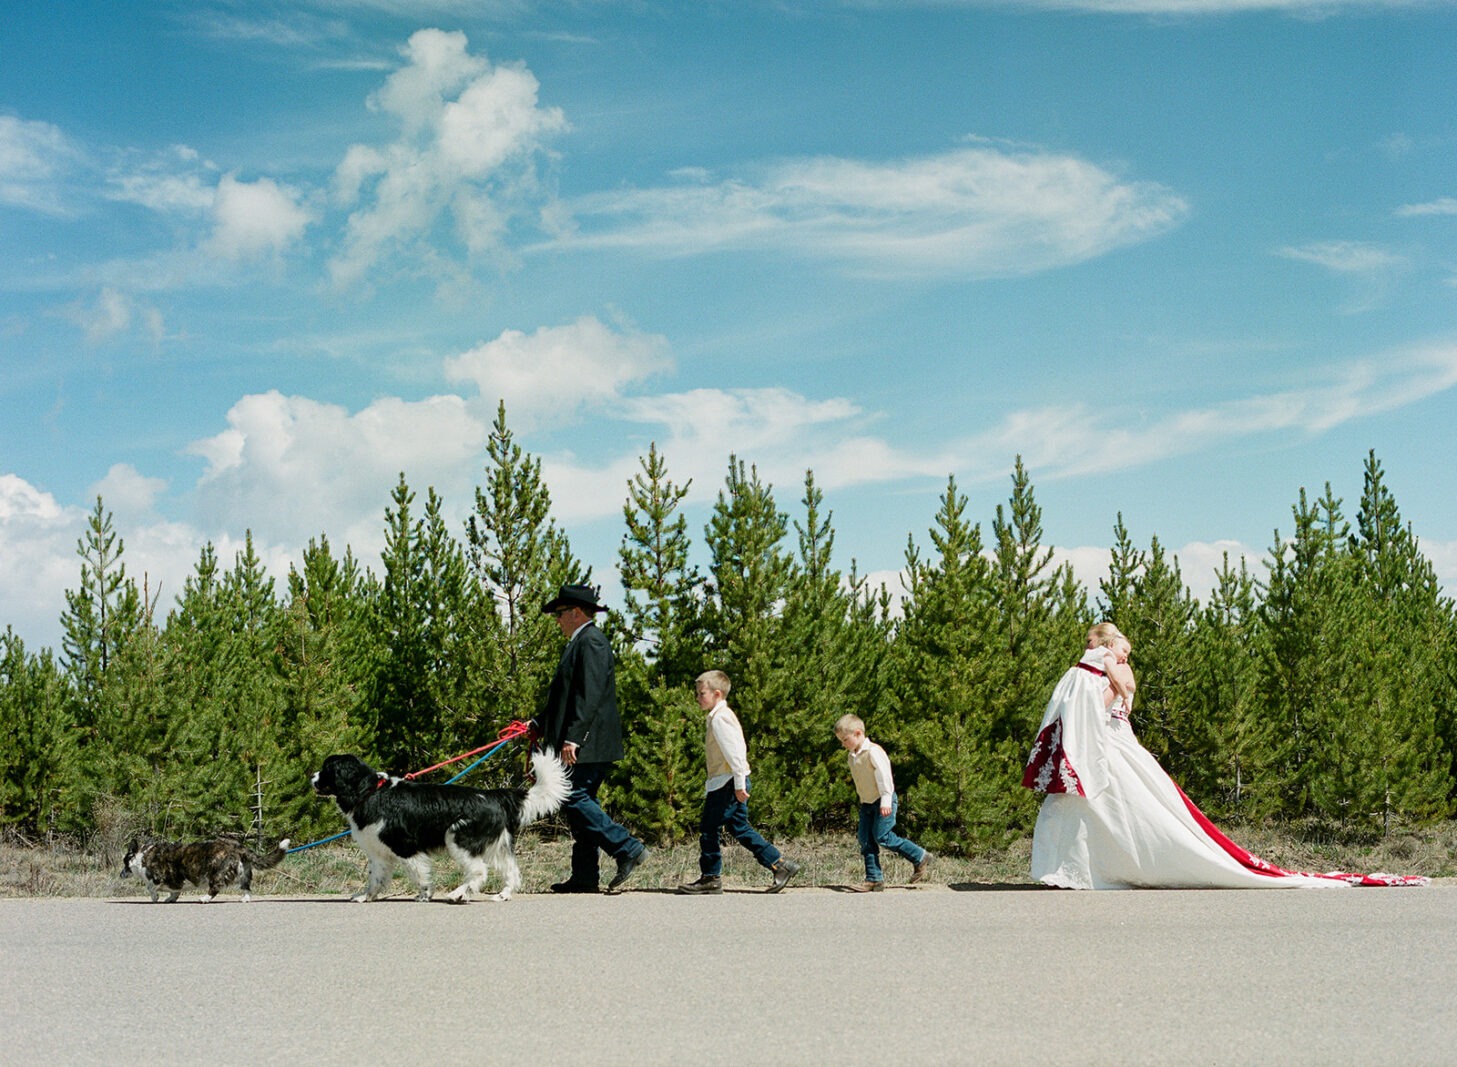 Anniversary photoshoot of family walking on a road in front of pine trees
